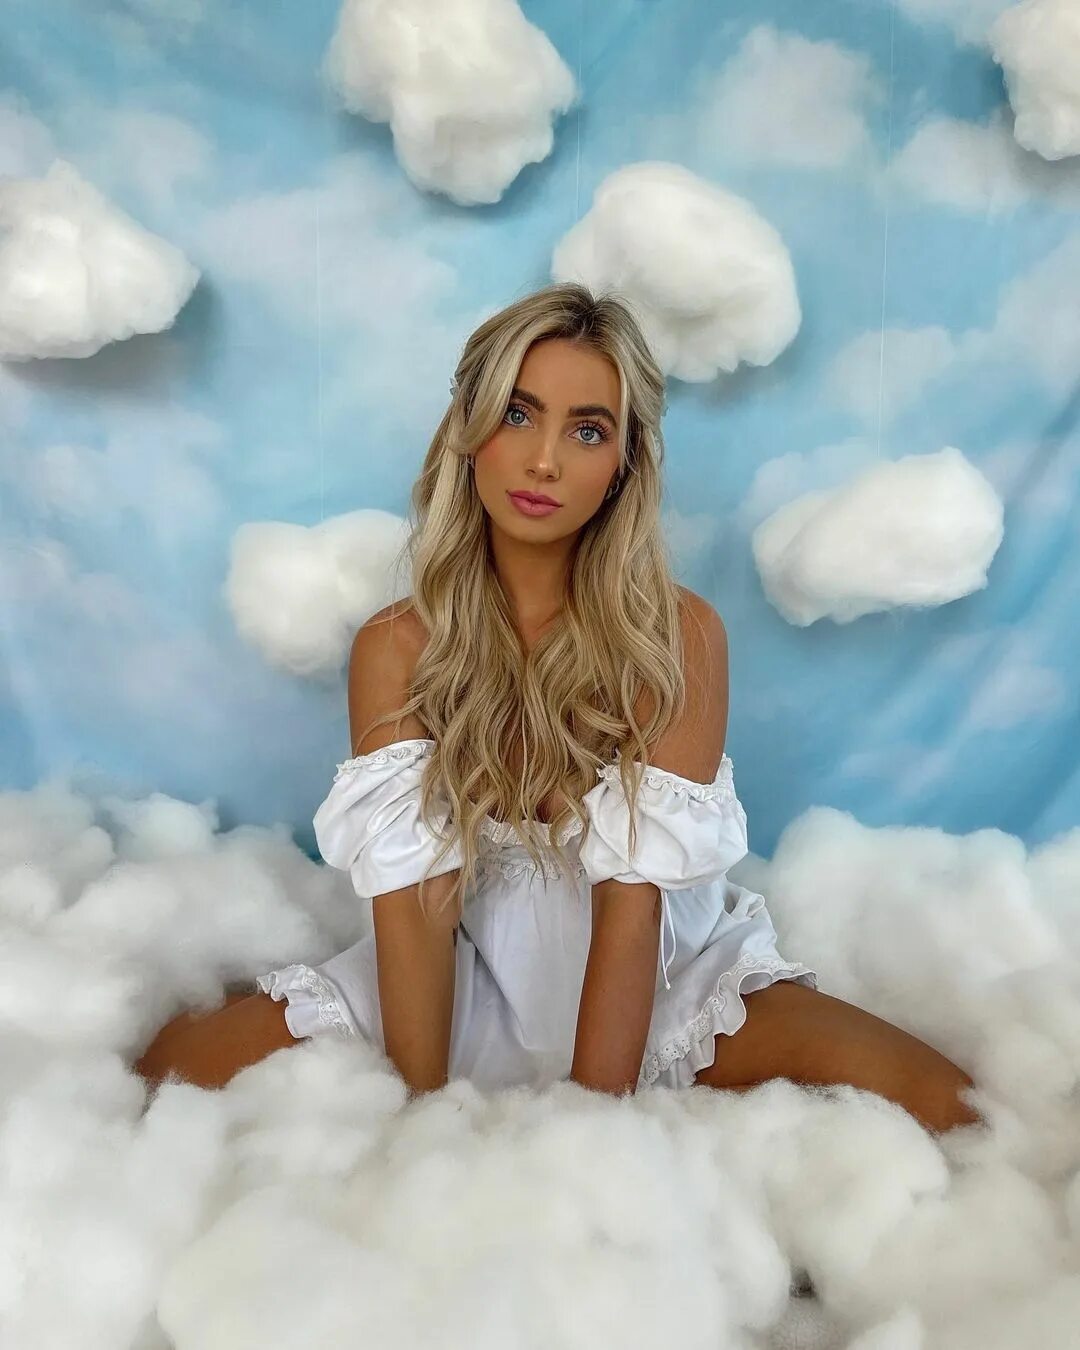 Lexi on Instagram: "Head in the clouds" .